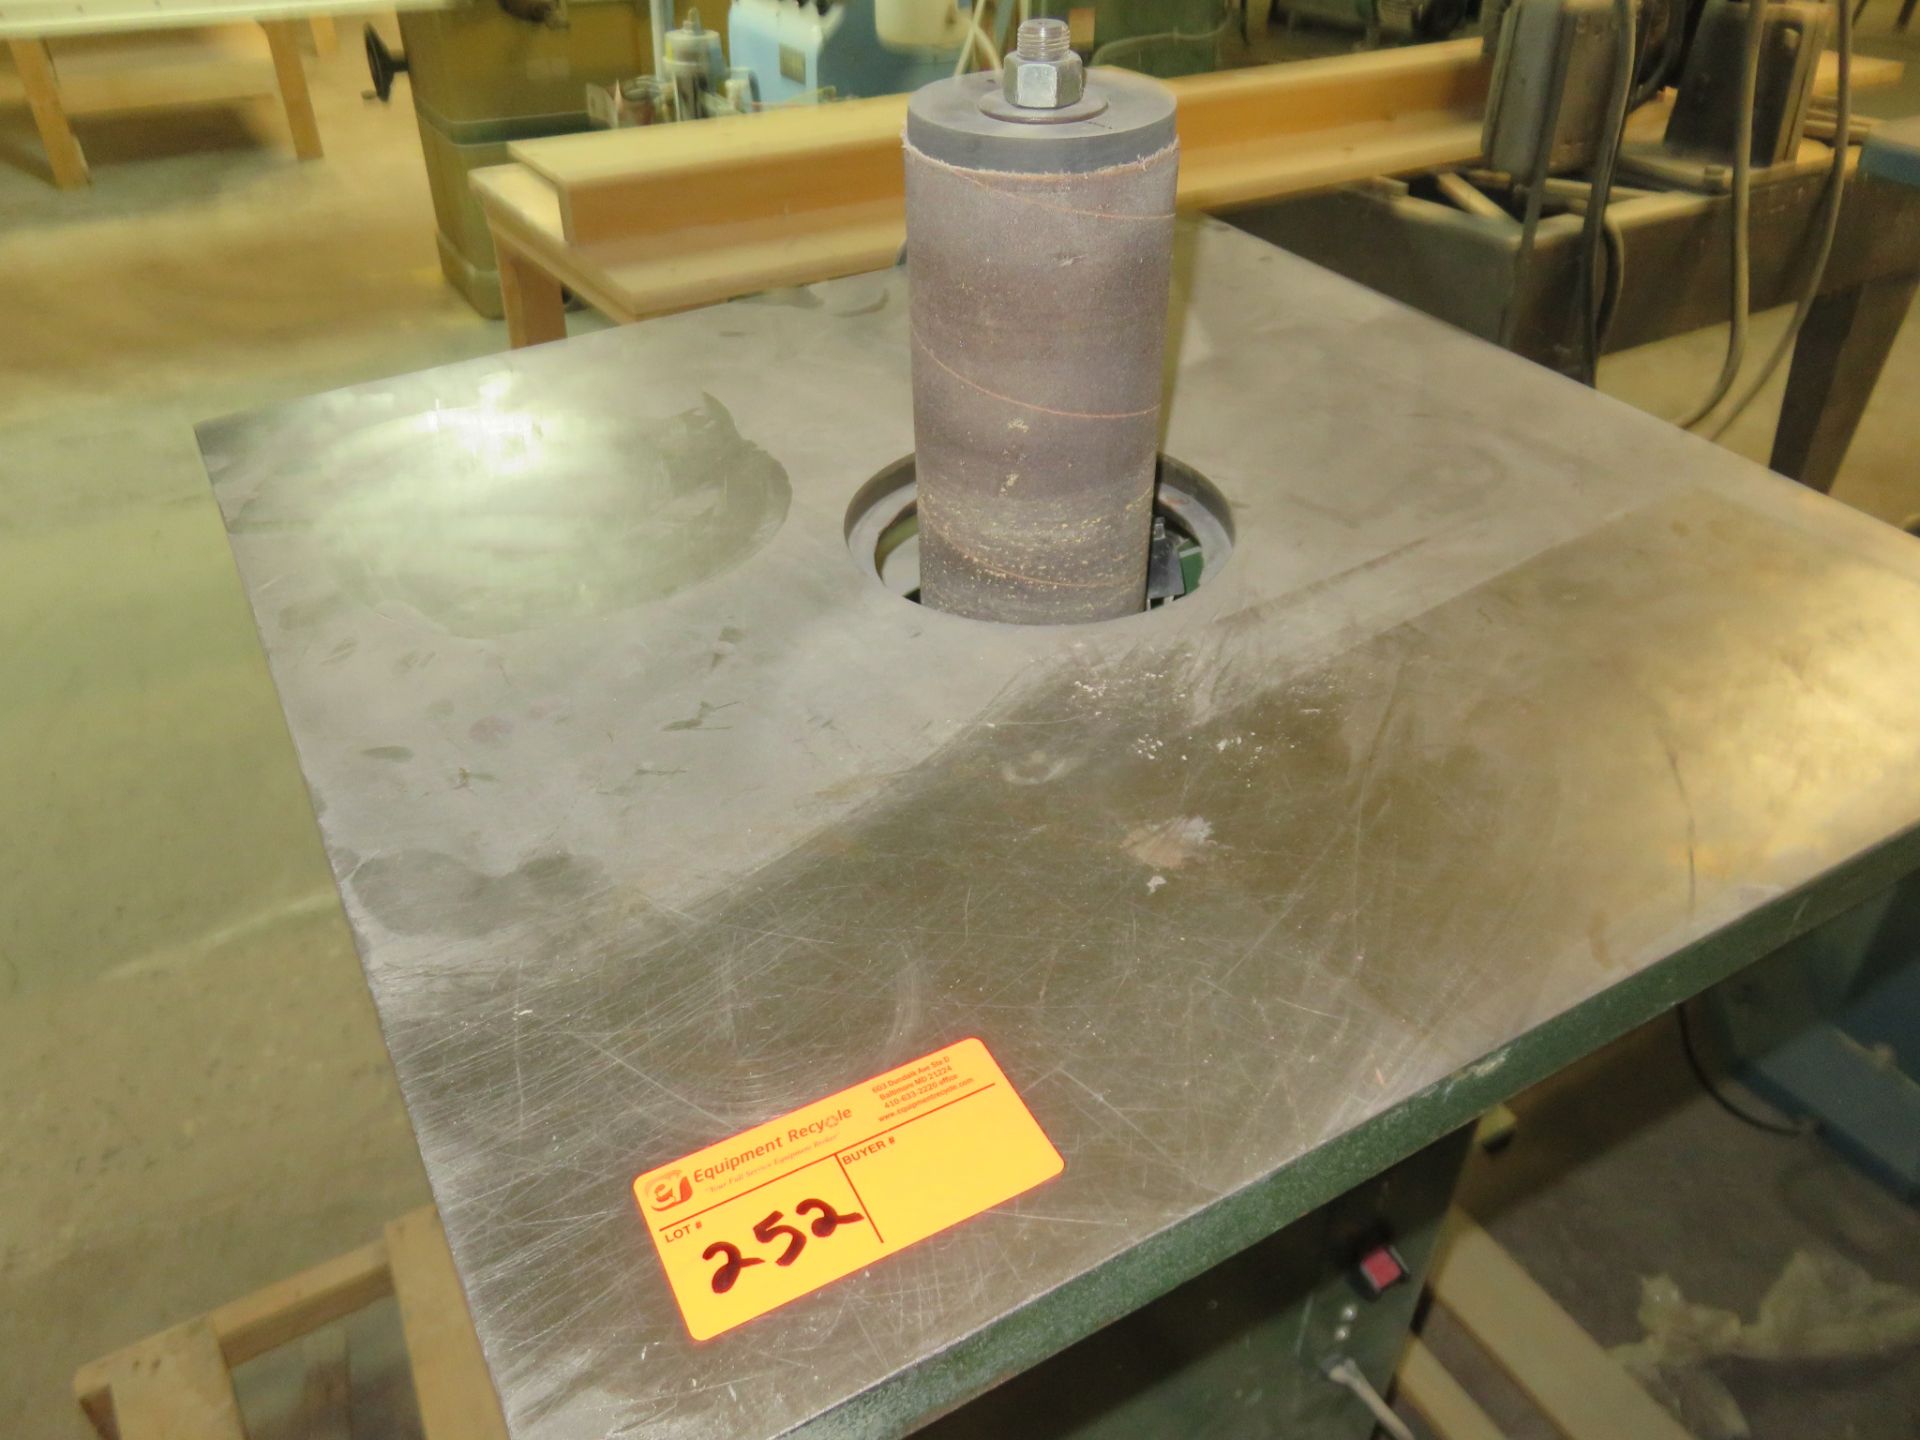 Grizzly Vertical Spindle Sander G1071 - Image 4 of 6